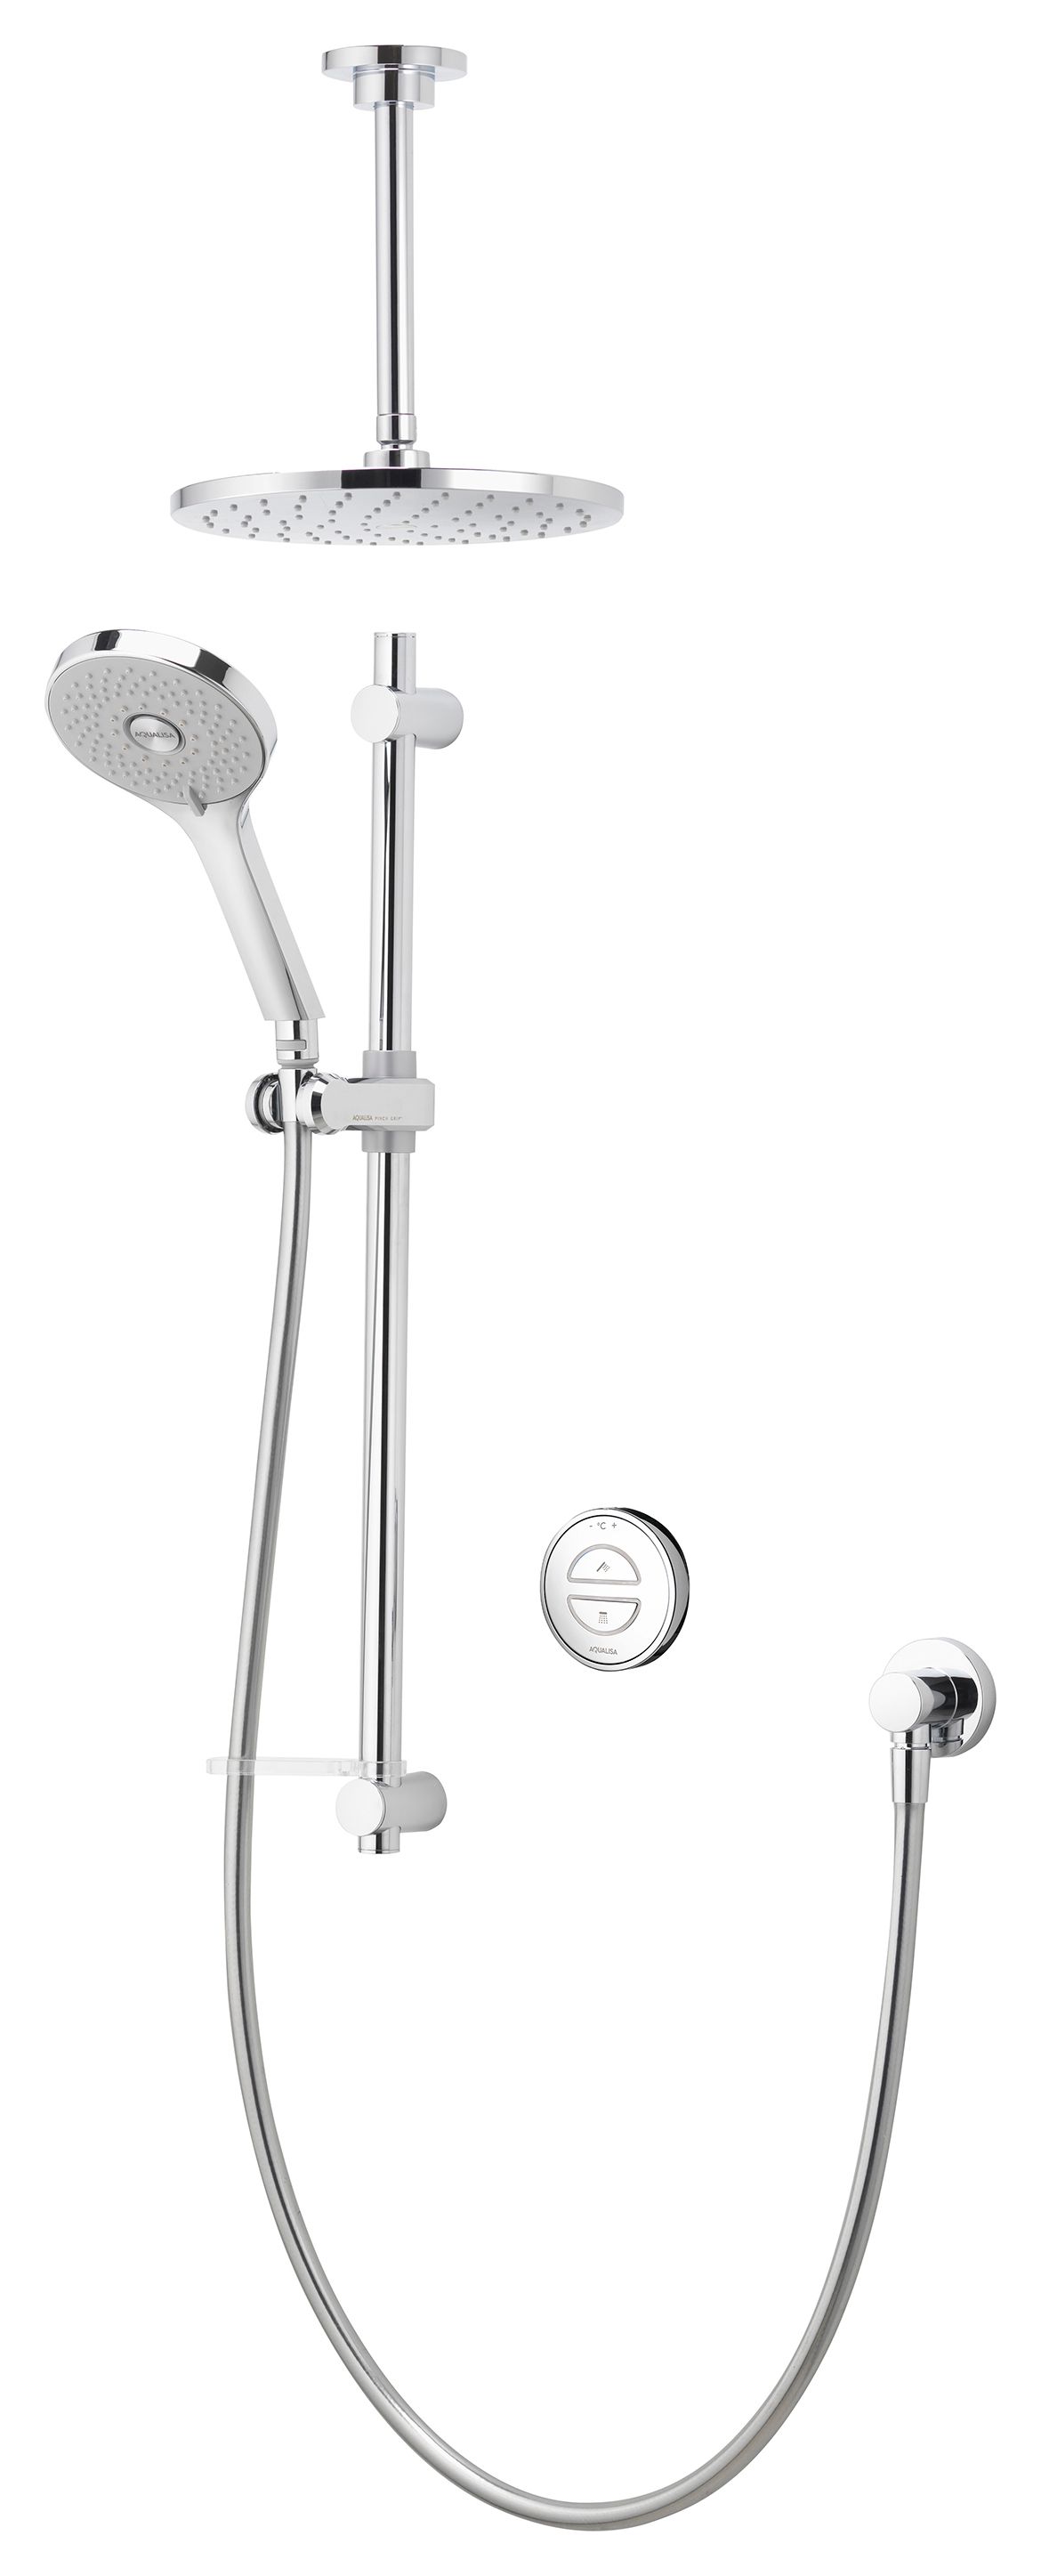 Image of Aqualisa Unity Q Smart Divert Concealed High Pressure Combi Shower with Adjustable & Fixed Ceiling Head